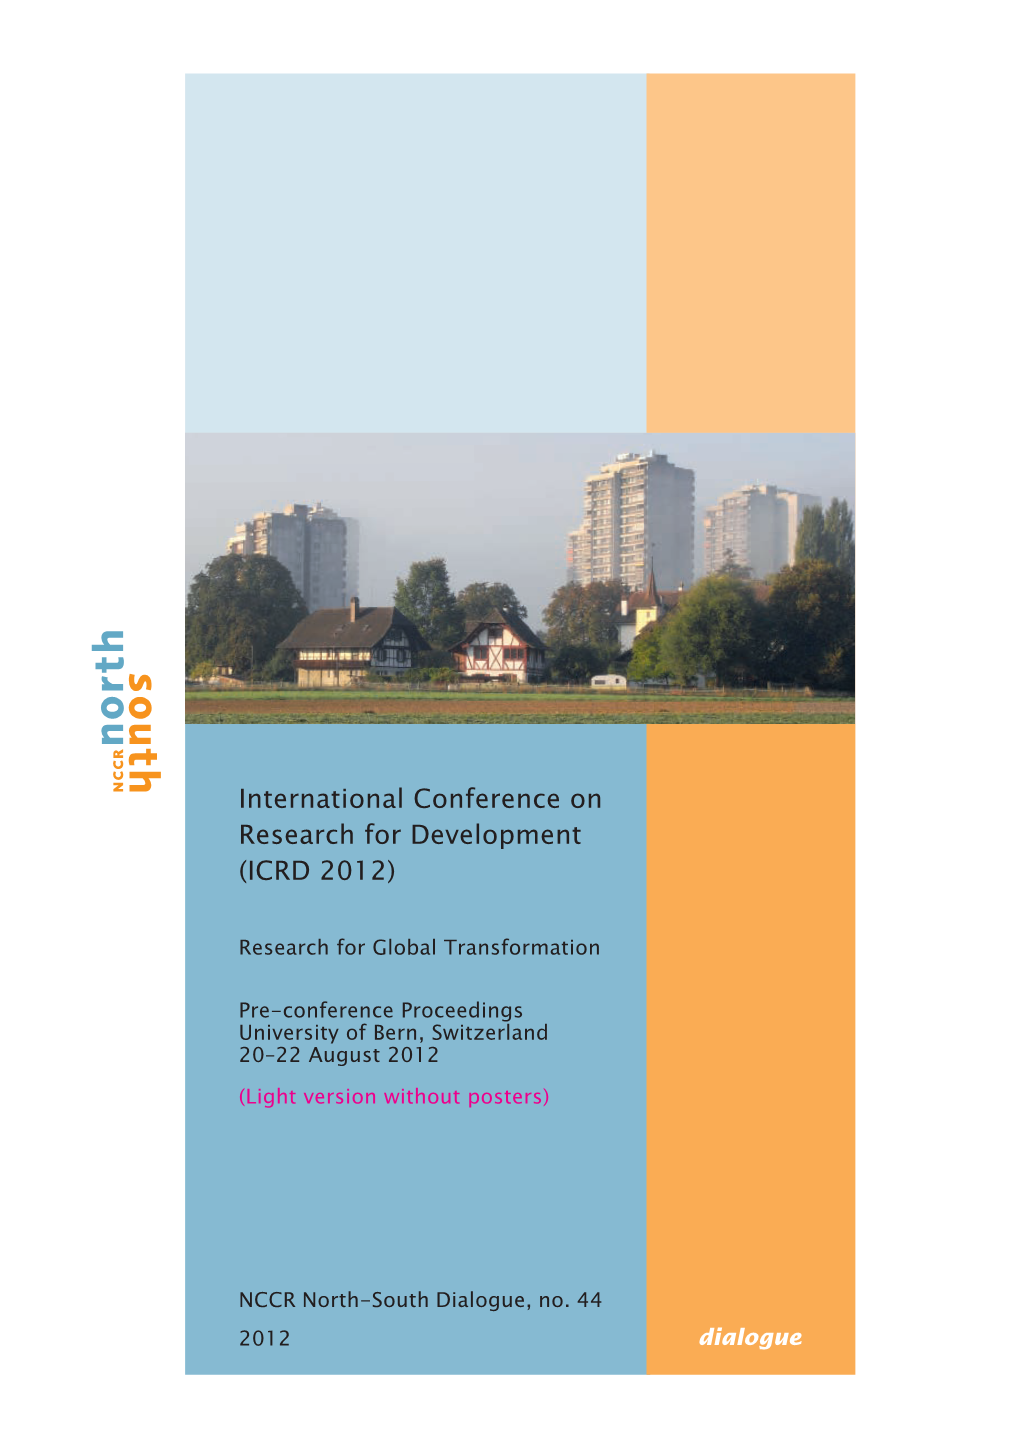 International Conference on Research for Development (ICRD 2012)